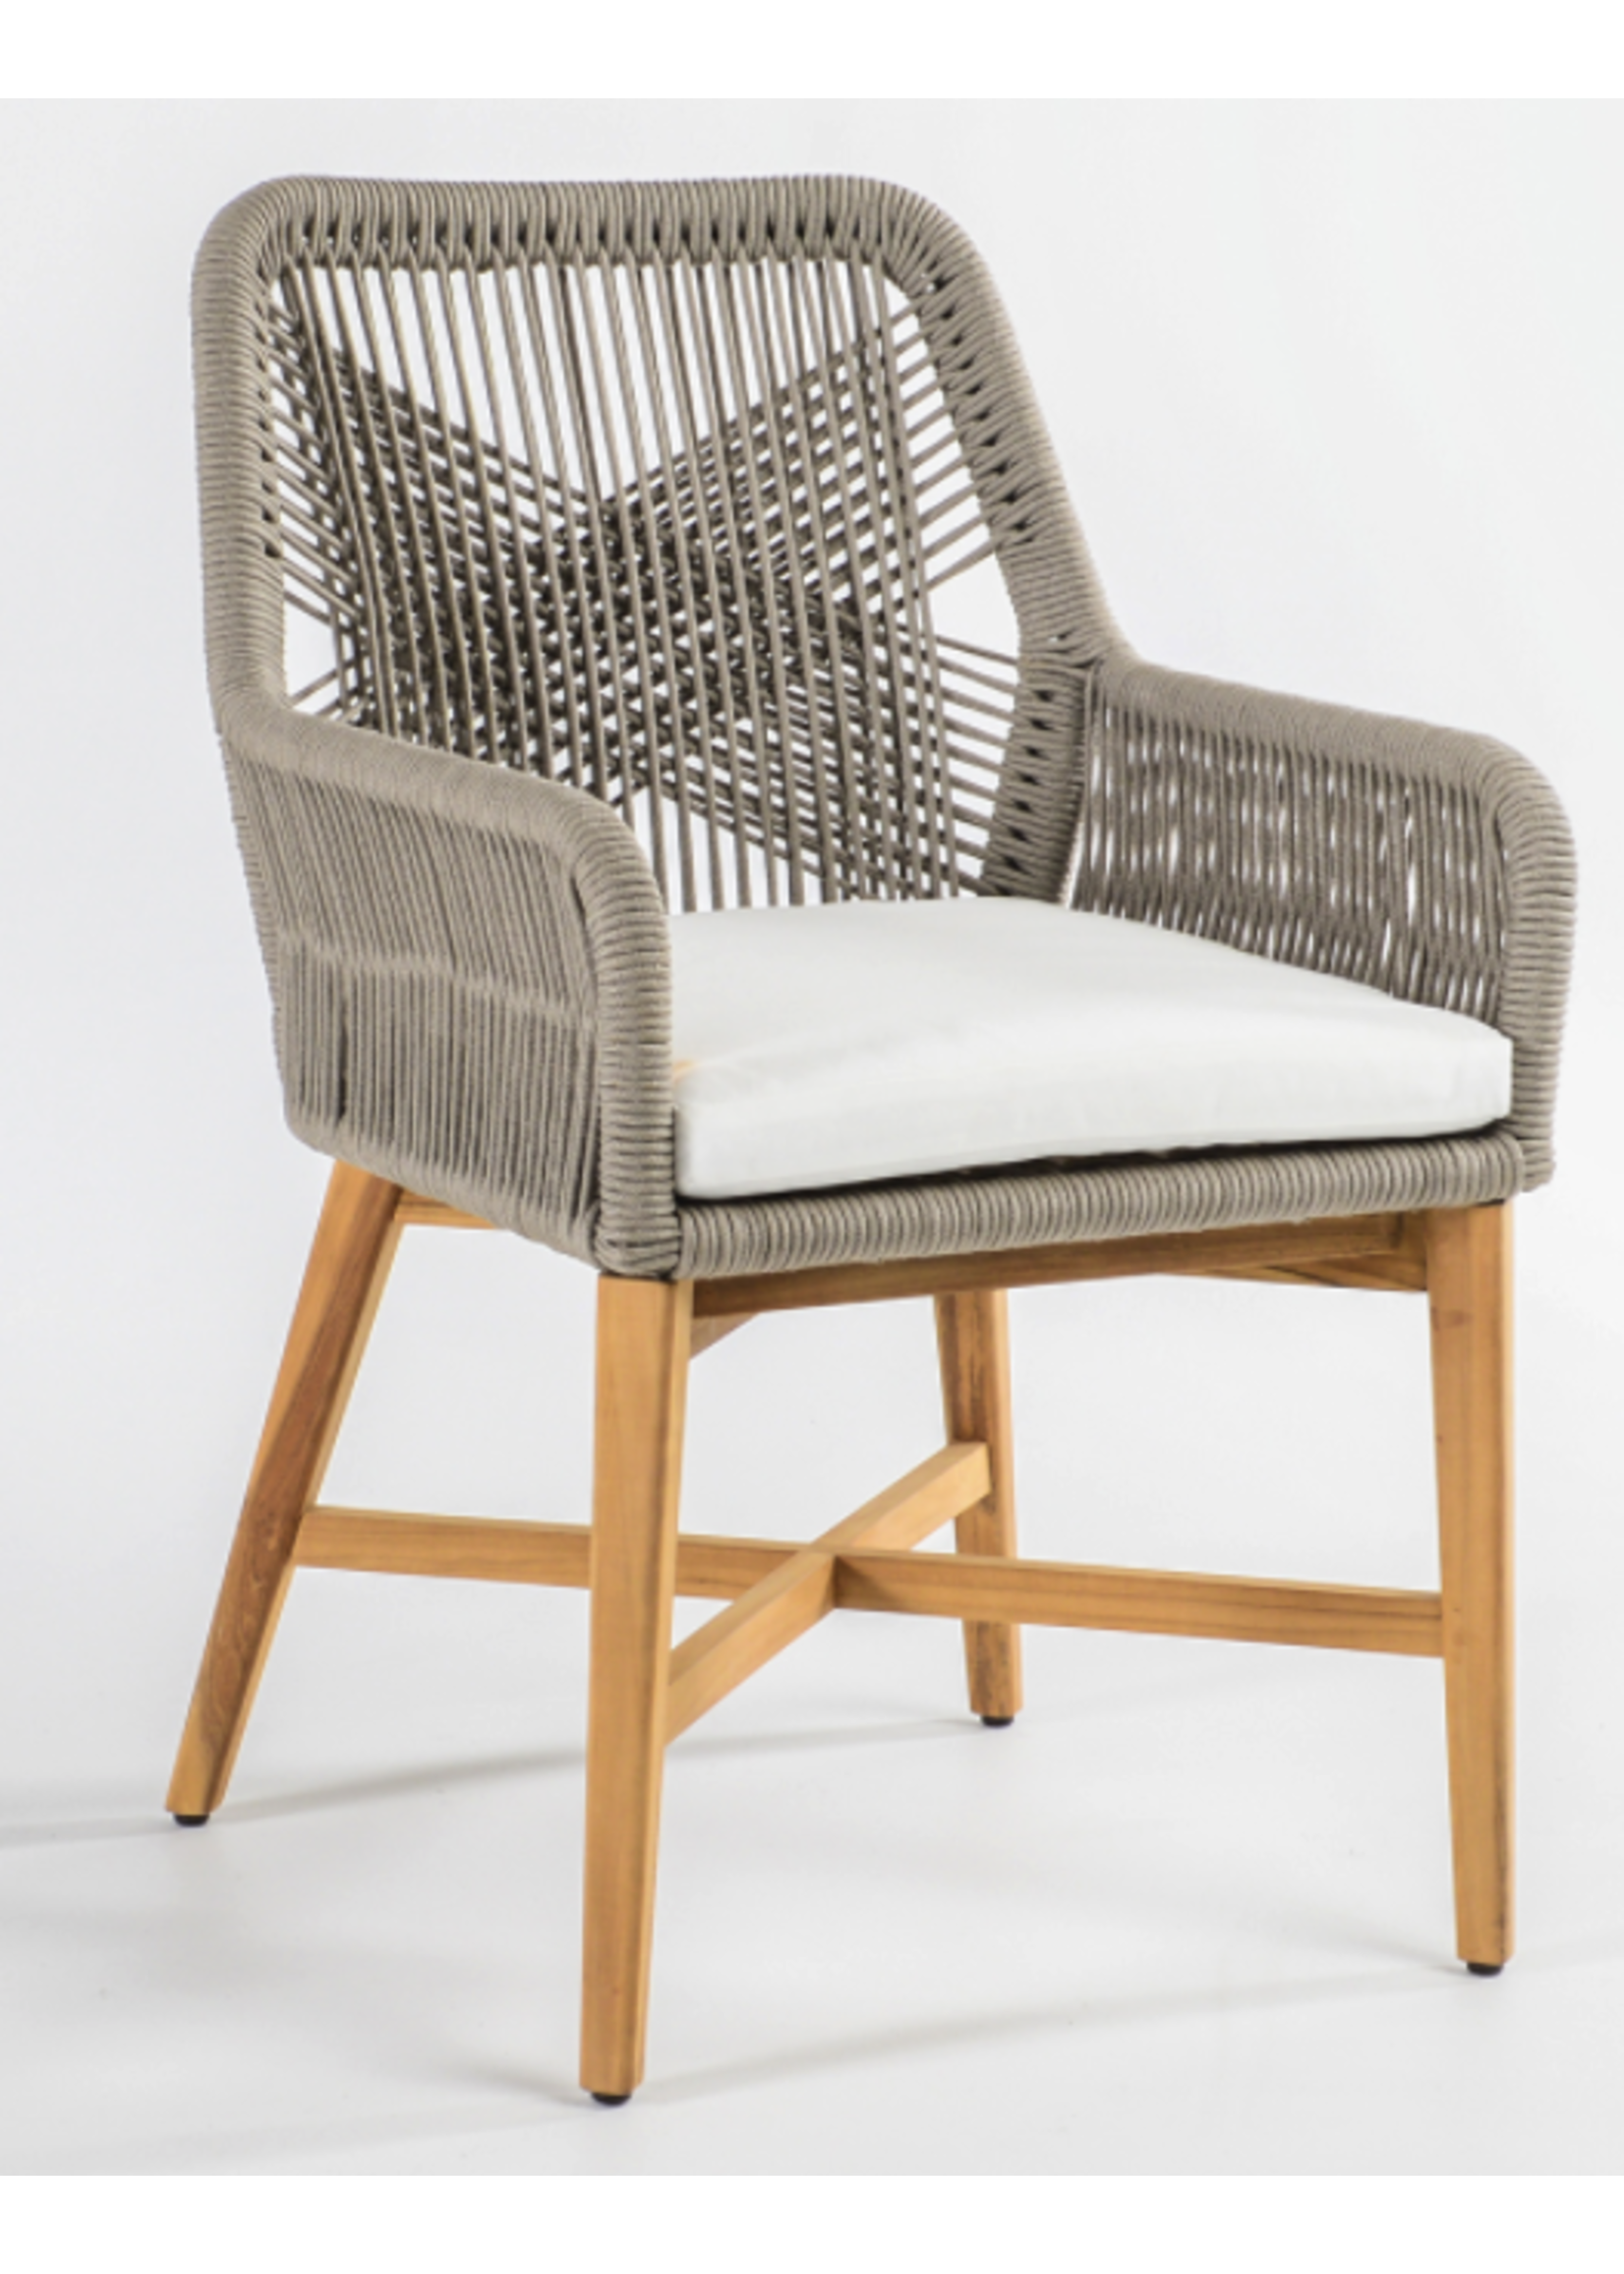 Marley Outdoor Dining Chair